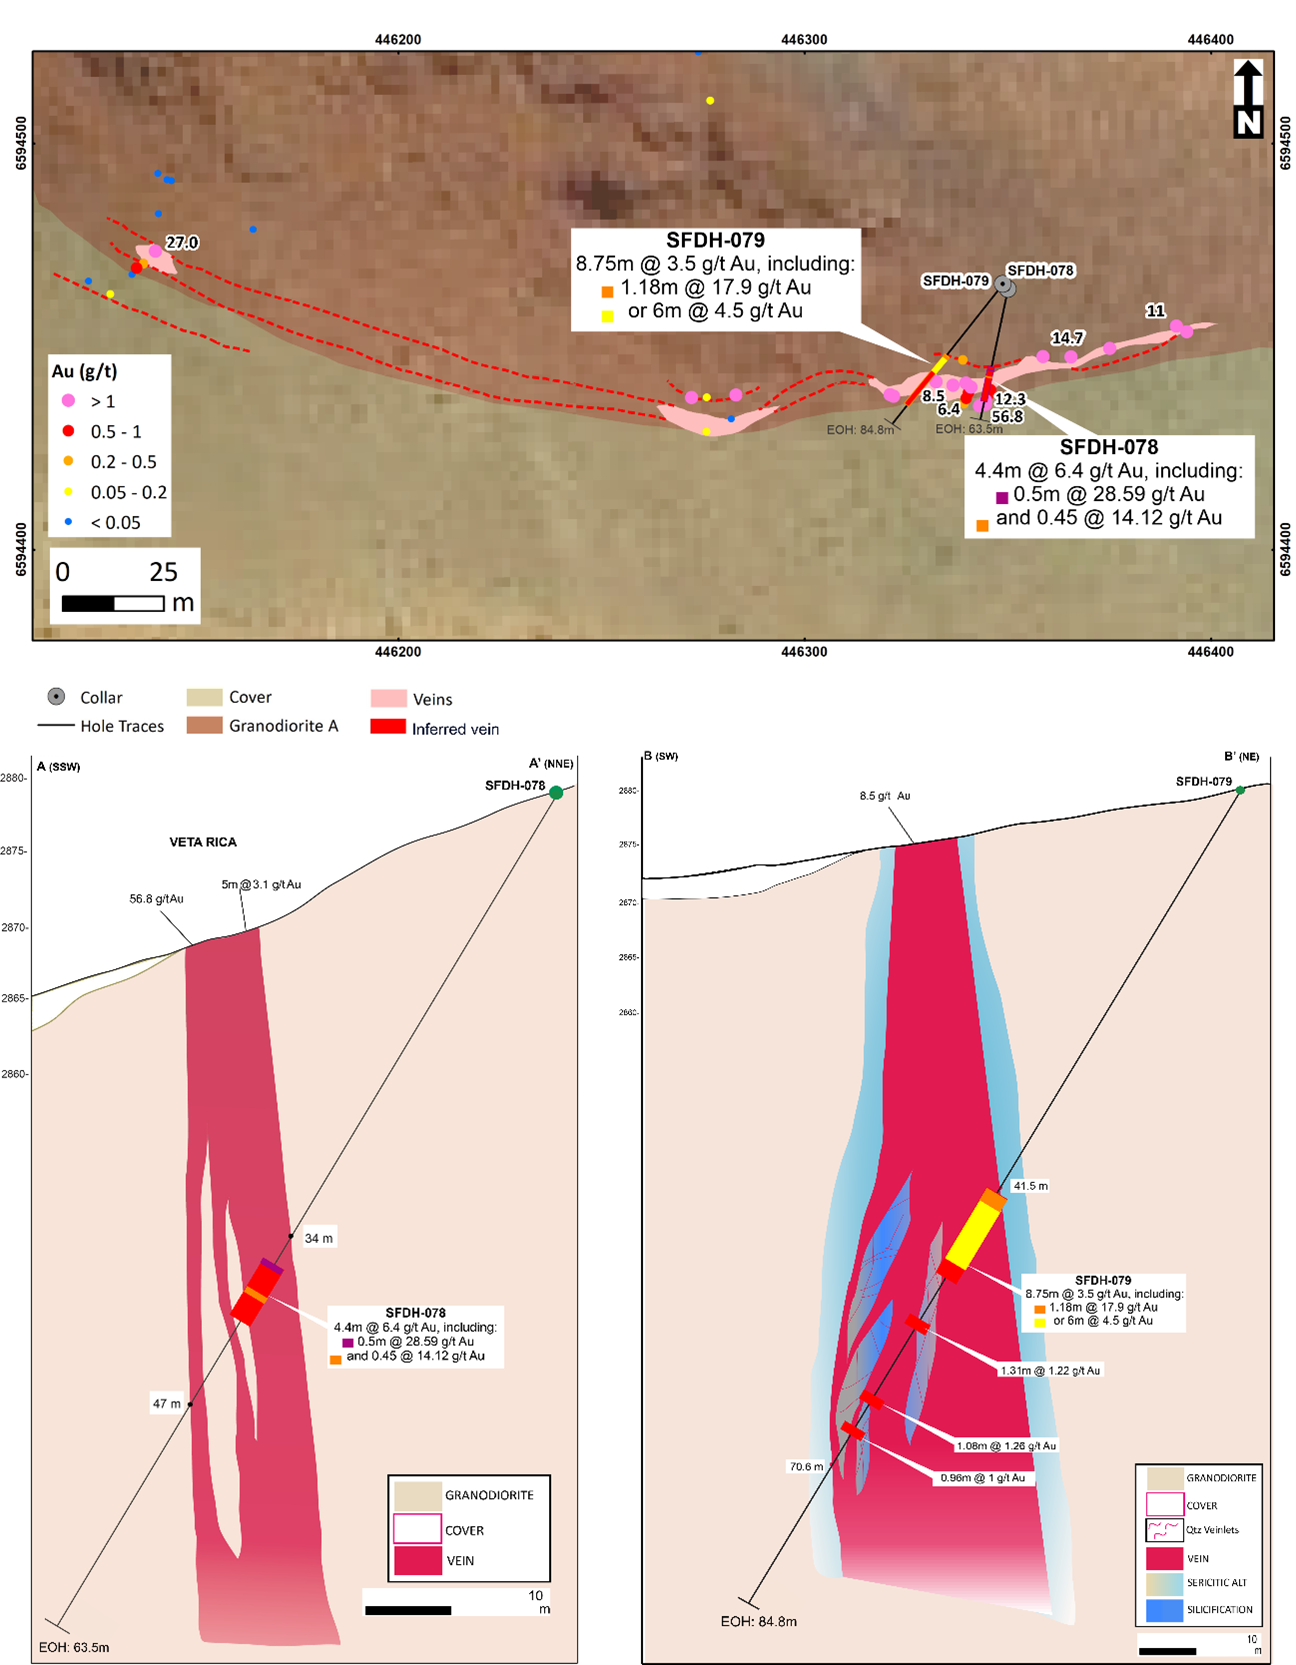 Veta Rica Surface map and sections showing drill holes. Rock chip sampling of the Veta Rica vein 300m west of the drill target returned grades of up to 27 g/t Au.